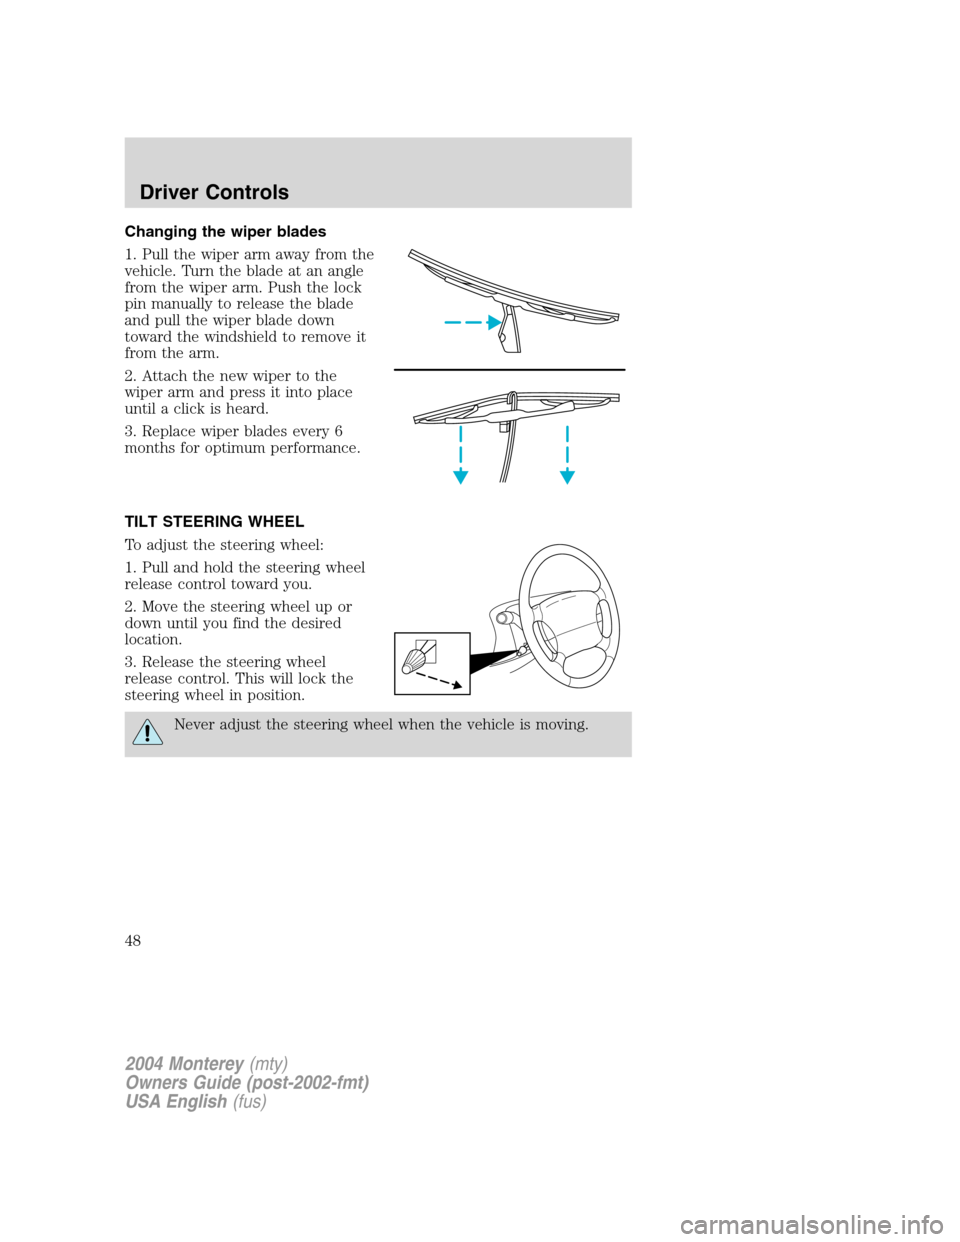 Mercury Monterey 2004  s Service Manual Changing the wiper blades
1. Pull the wiper arm away from the
vehicle. Turn the blade at an angle
from the wiper arm. Push the lock
pin manually to release the blade
and pull the wiper blade down
towa